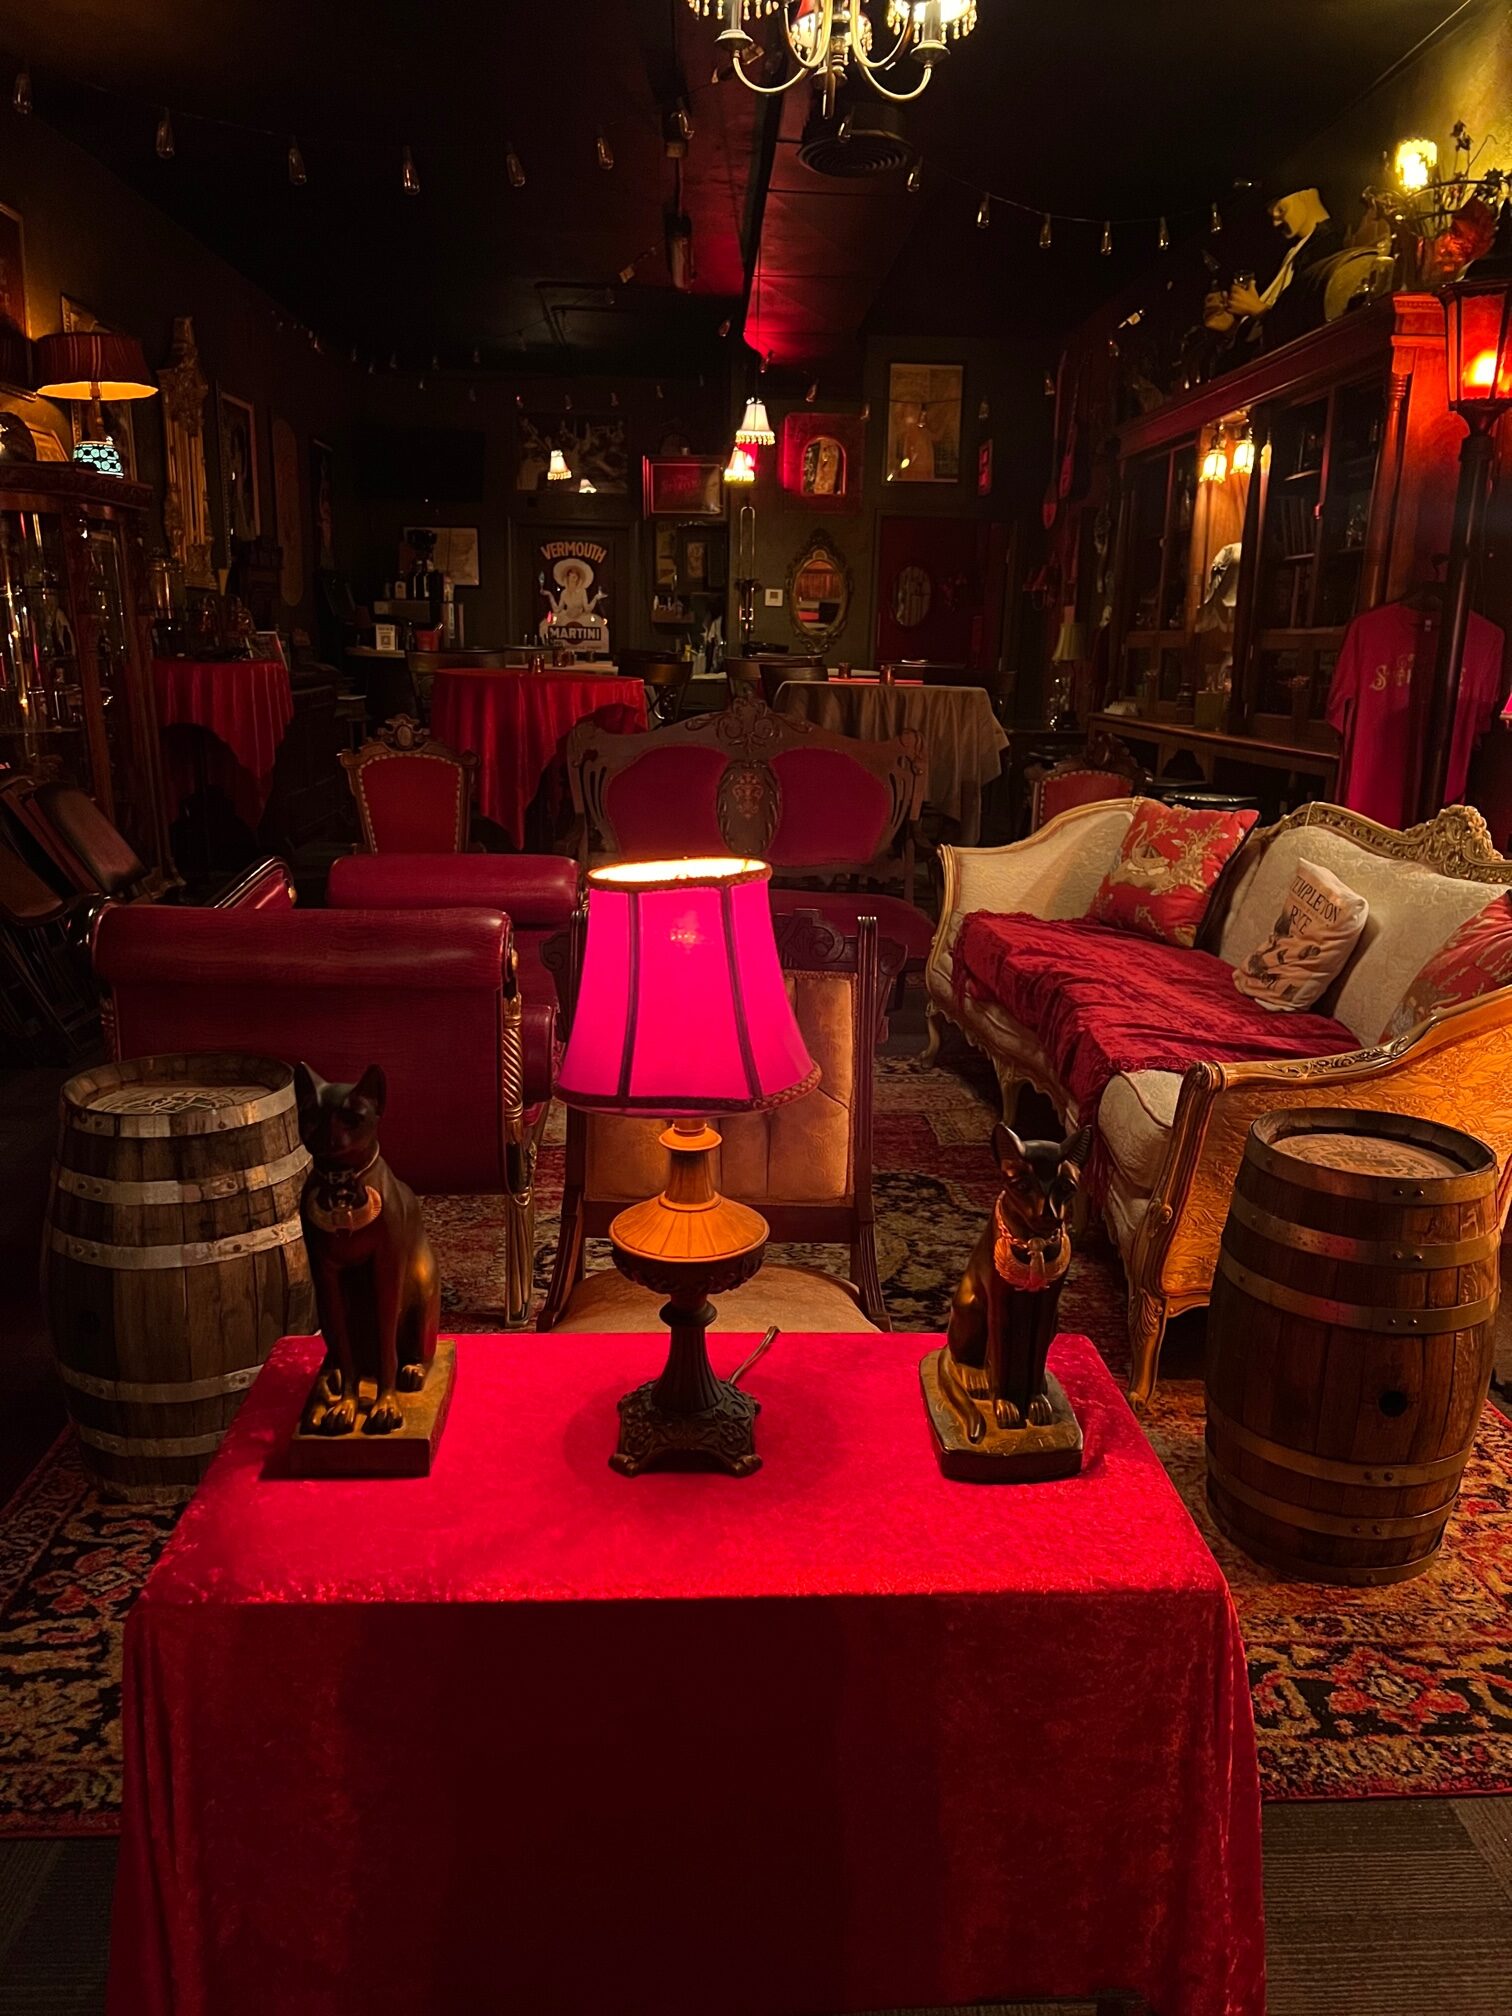 Dr-Tumbletys-tarot-Reading-Room-inspired-by-spirits-storyville-lounge-private-events-pittsburgh-distillery-burlesque-creative-cocktails-7